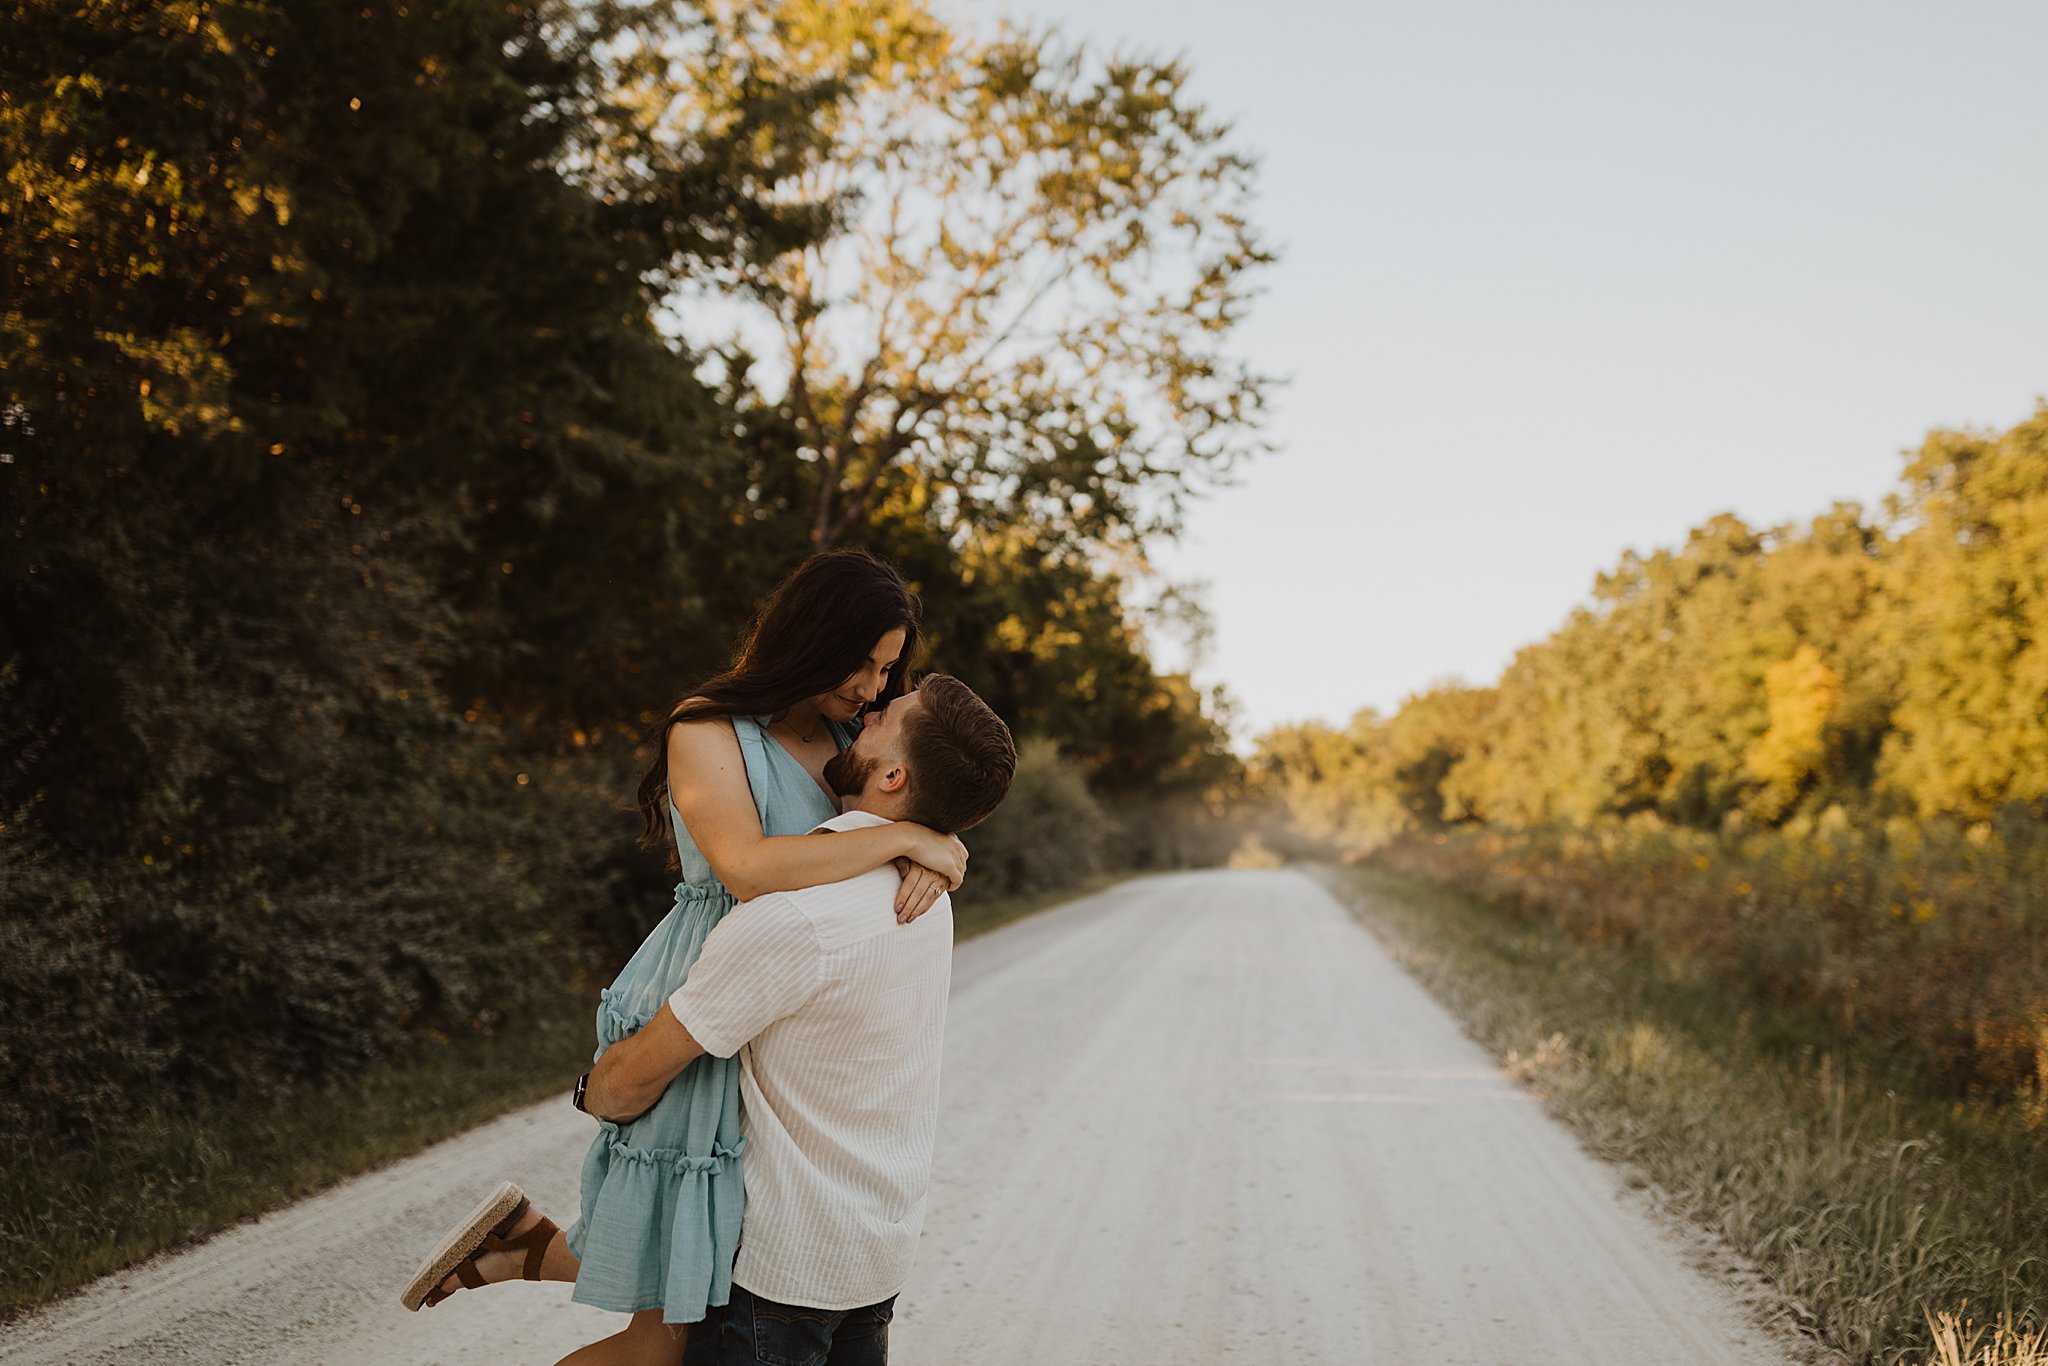 Cute Engagement Poses | Photo Ideas 